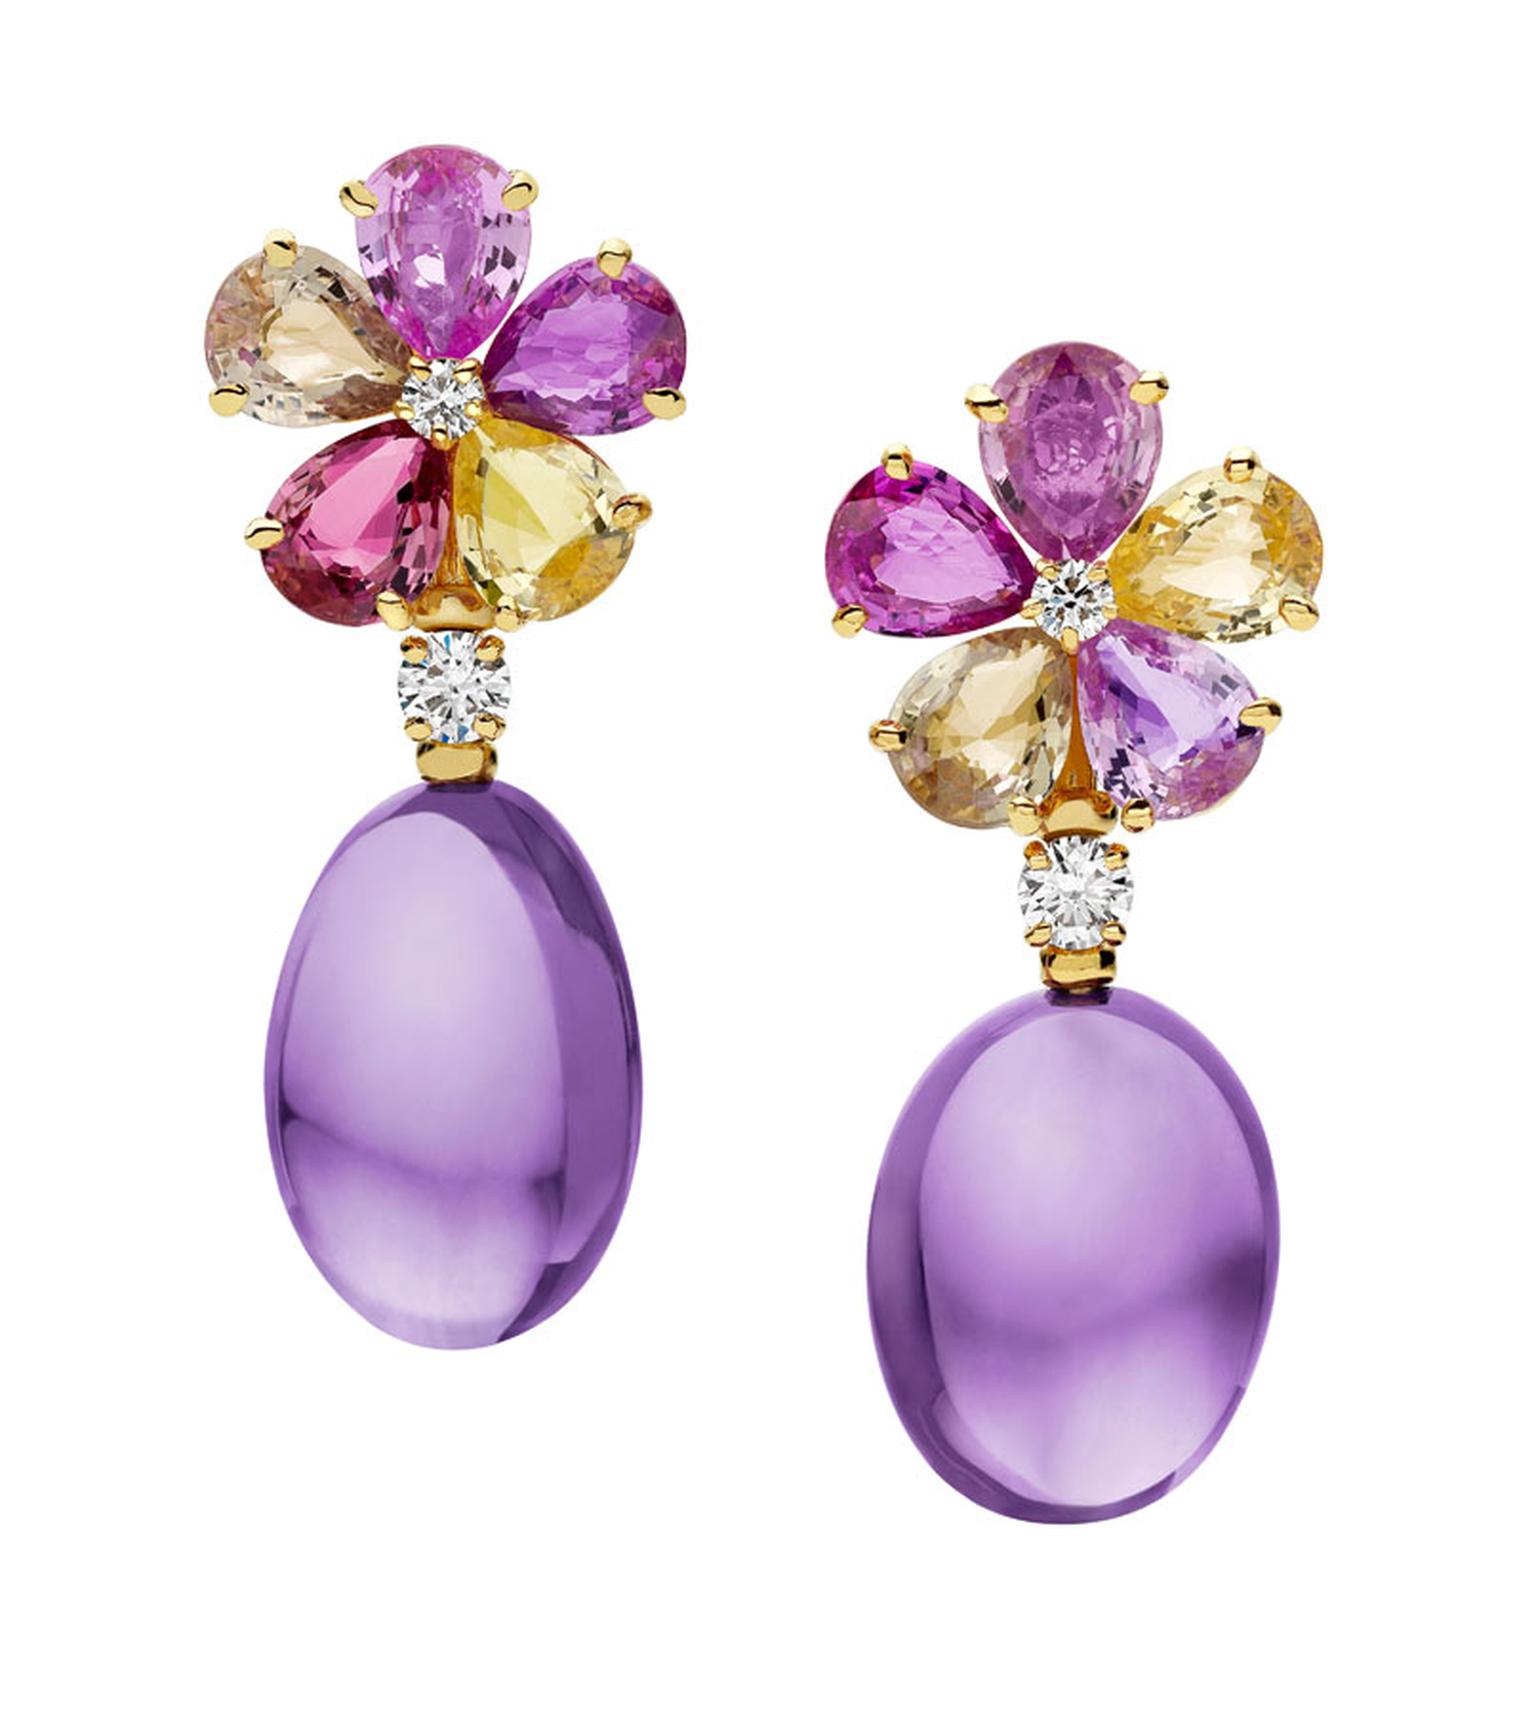 Bulgari. Mediterranean Eden yellow gold earrings mounting fancy sapphires, amethysts, diamonds and pave´ diamonds. Price-from £16.700,00